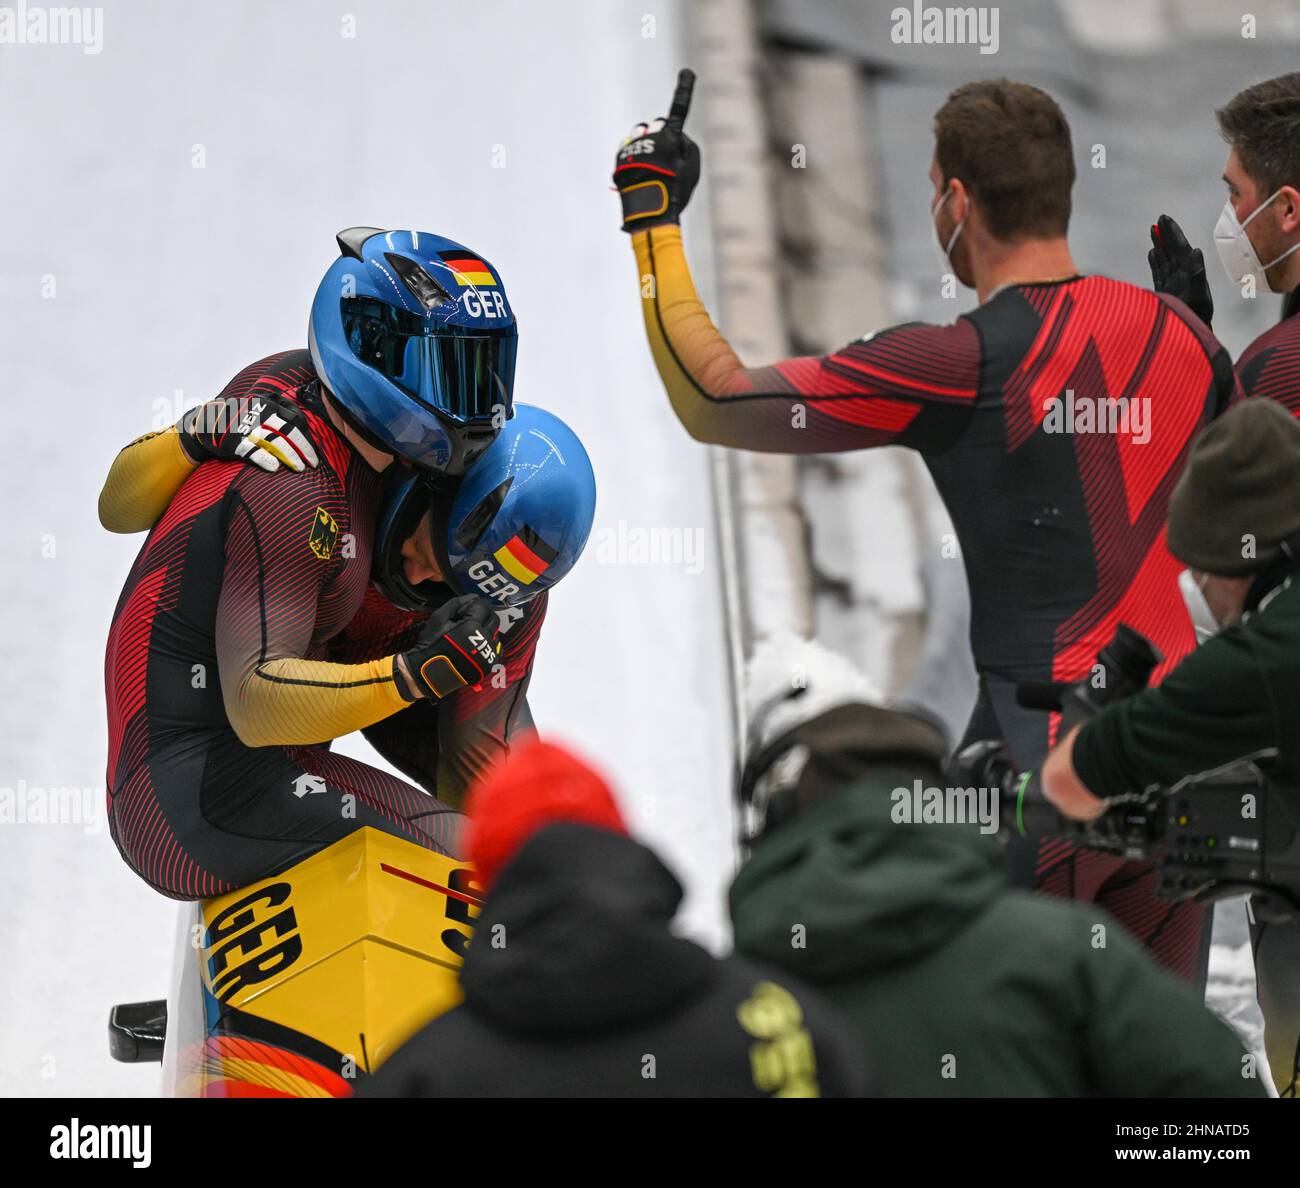 Beijing, China. 15th Feb, 2022. Francesco Friedrich/Thorsten Margis (L) of Germany celebrate after the bobsleigh 2-man heat of Beijing 2022 Winter Olympics at National Sliding Centre in Yanqing District, Beijing, capital of China, Feb. 15, 2022. Credit: Sun Fei/Xinhua/Alamy Live News Stock Photo